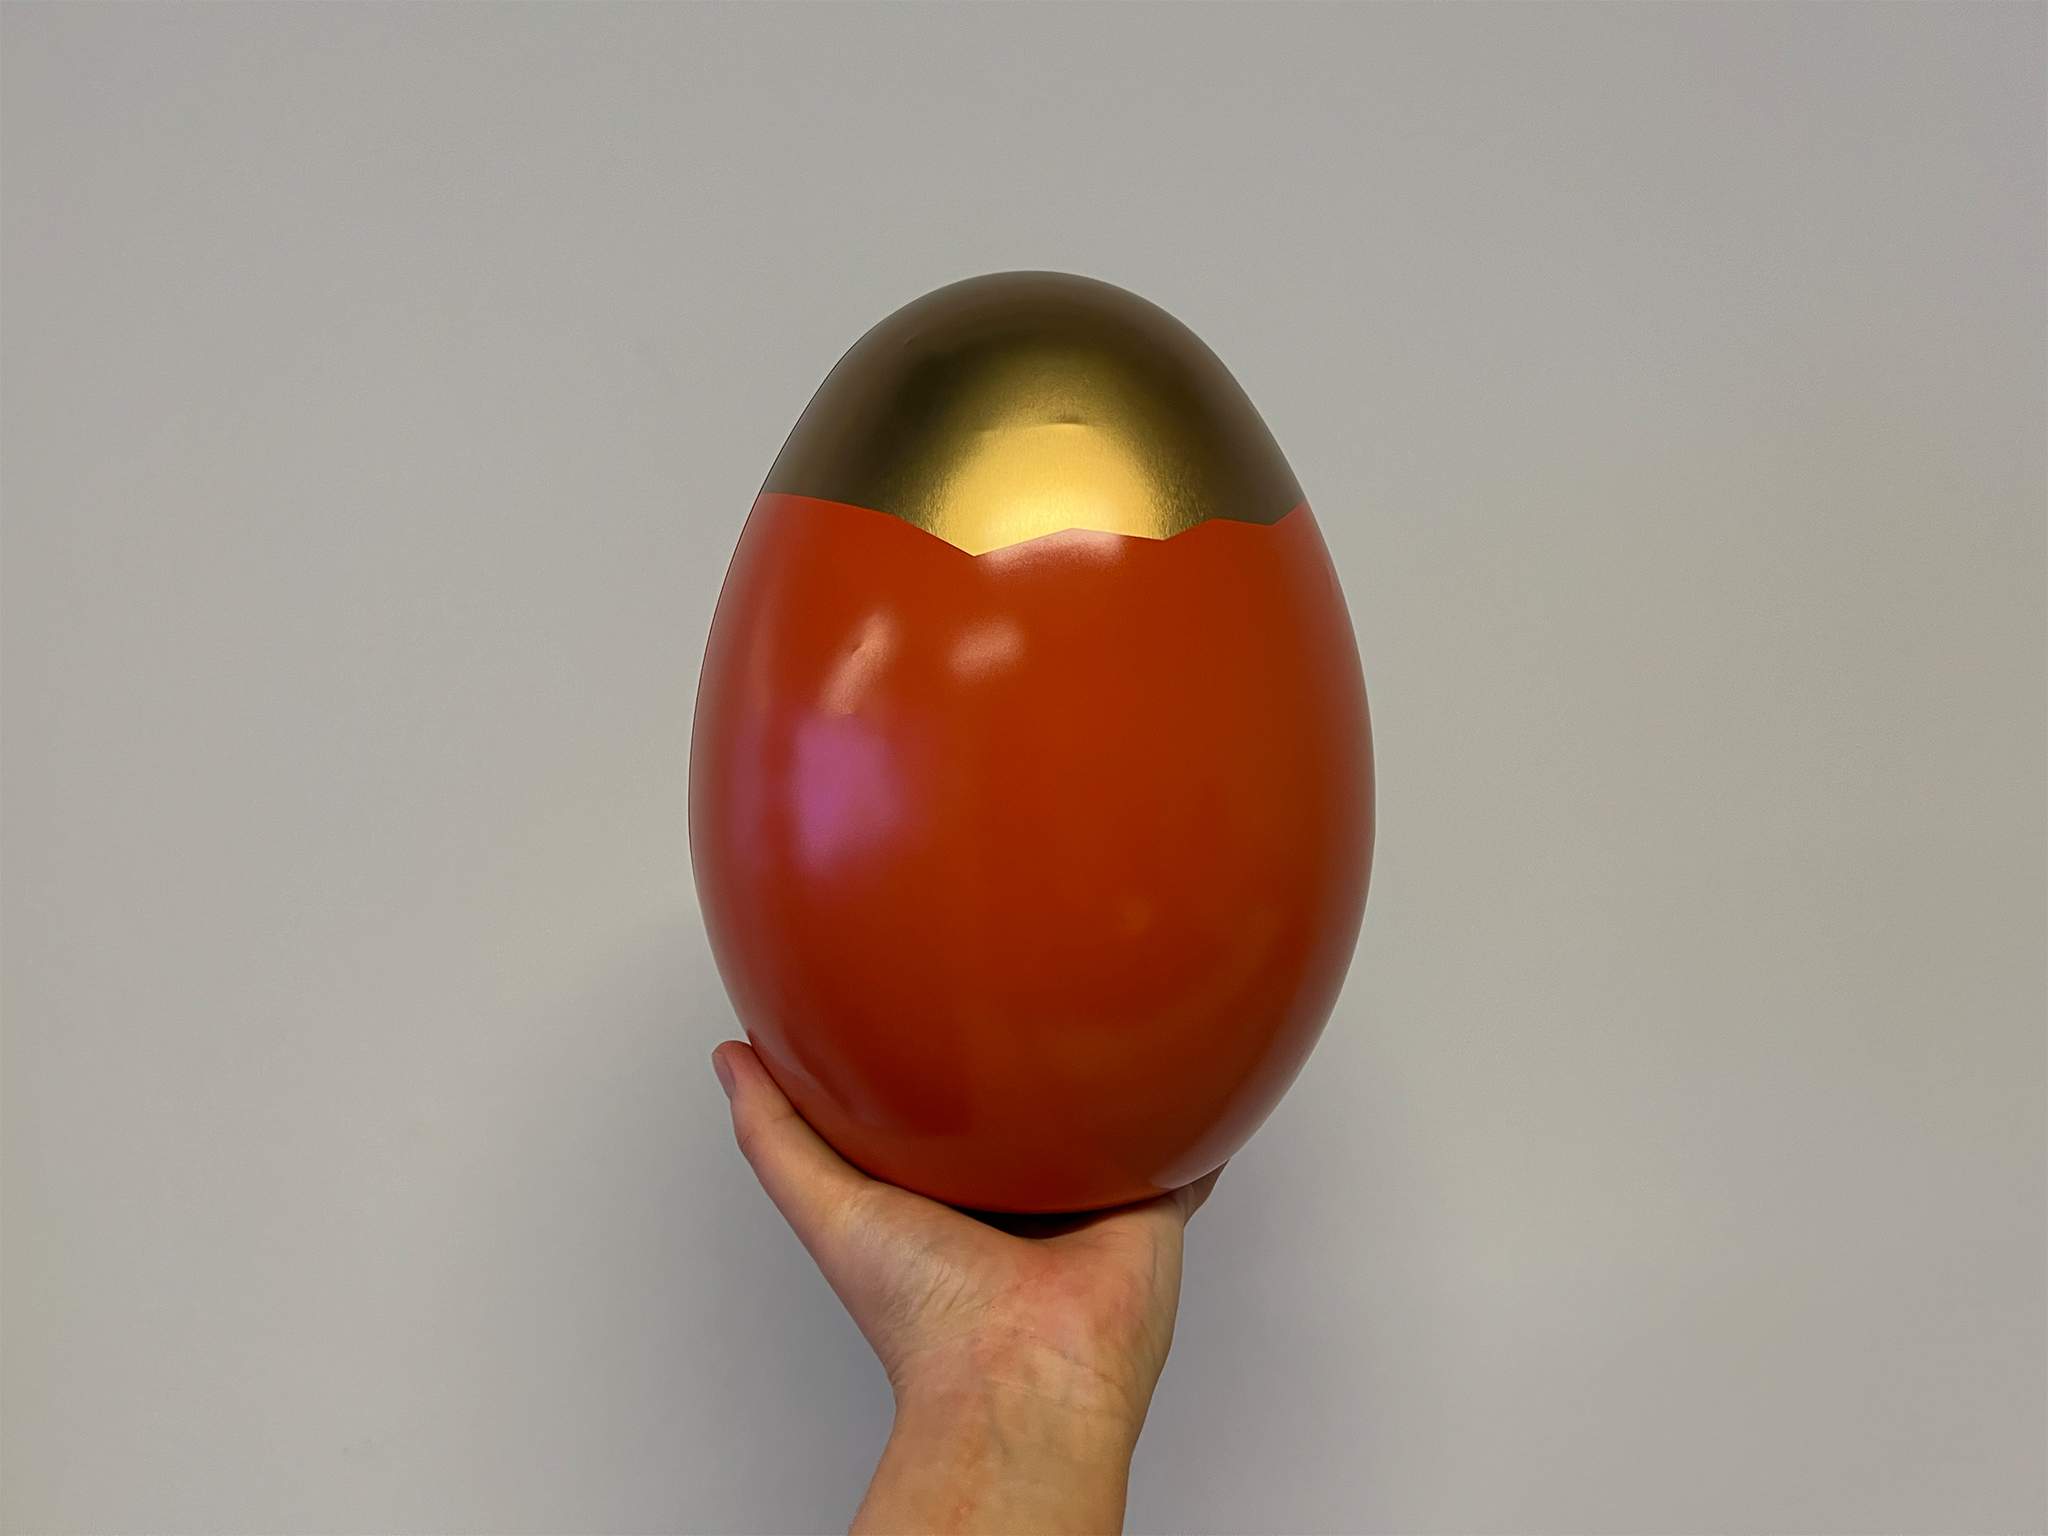 The Lookfantastic beauty Easter egg before we opened it